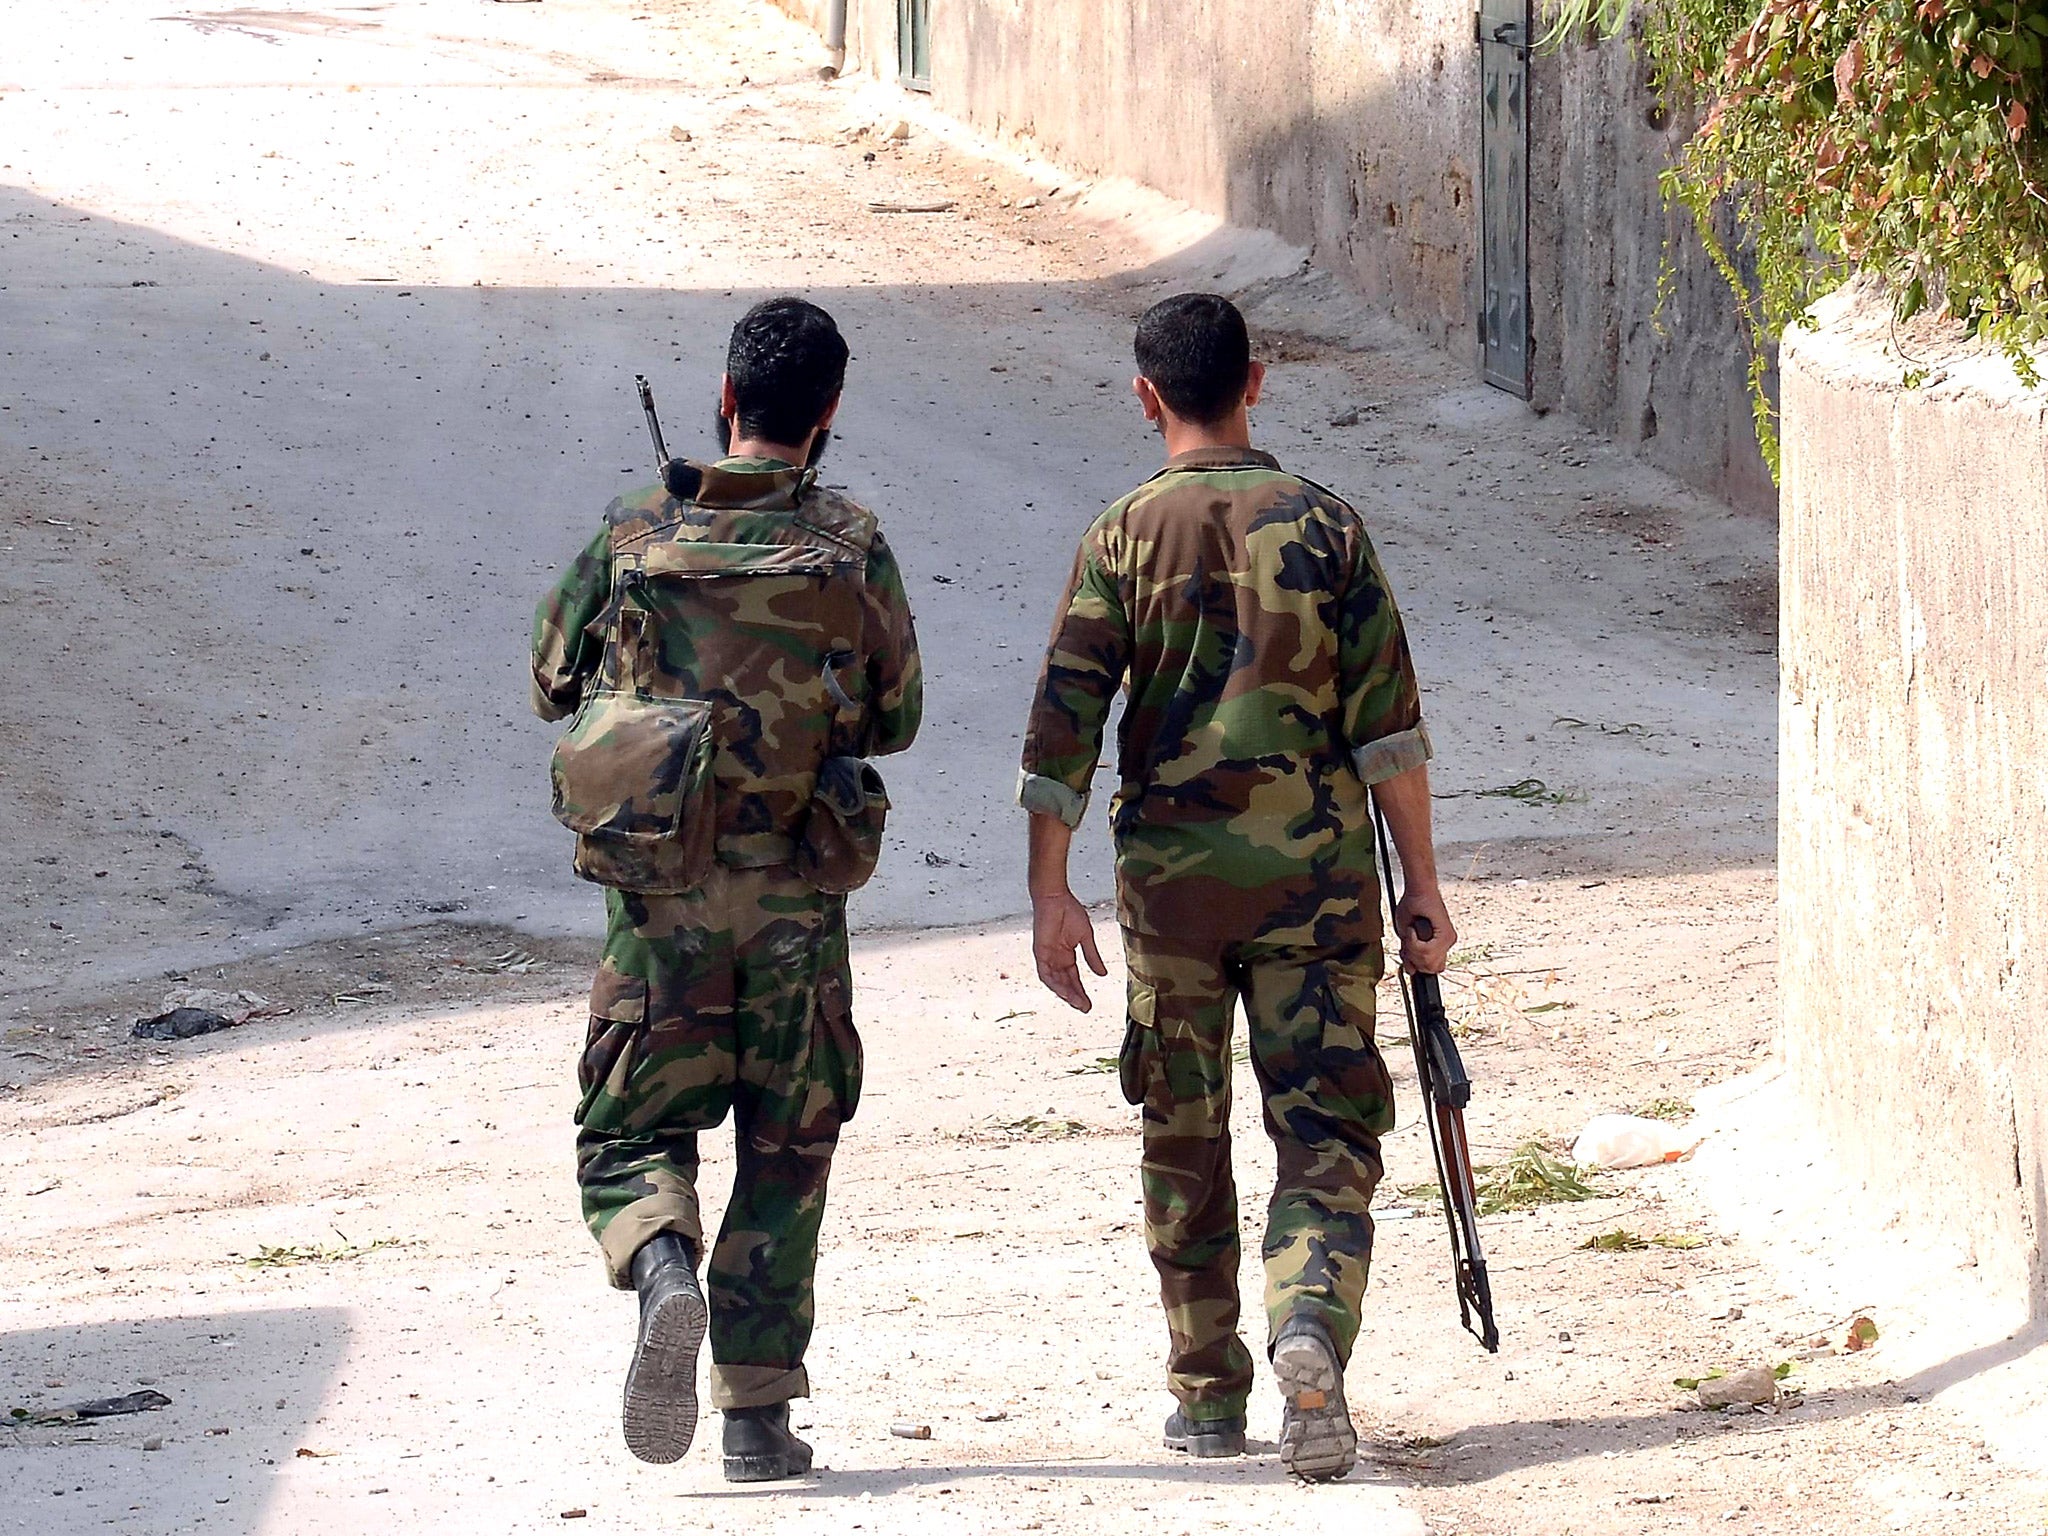 Syrian soldiers in Aleppo, where Muhammed fled from